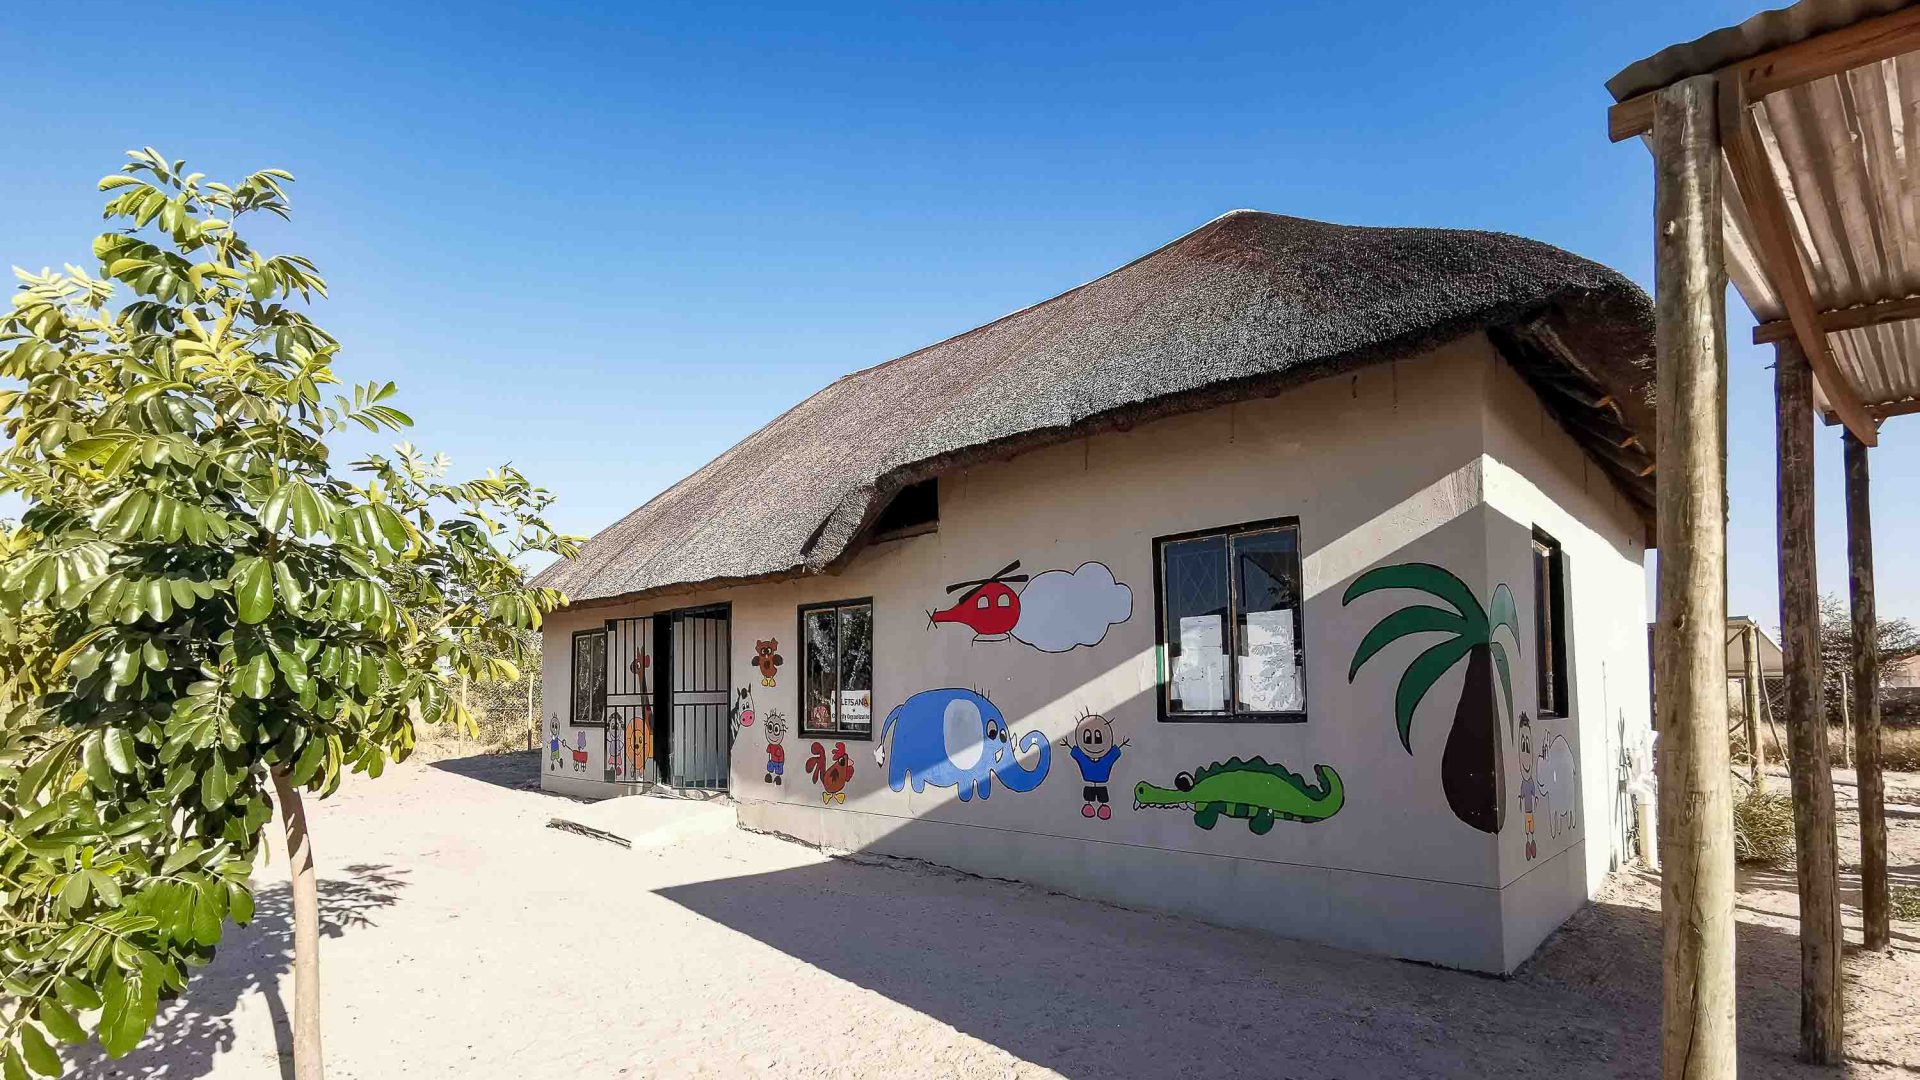 Khwai Pre-School with white walls with murals painted on them.